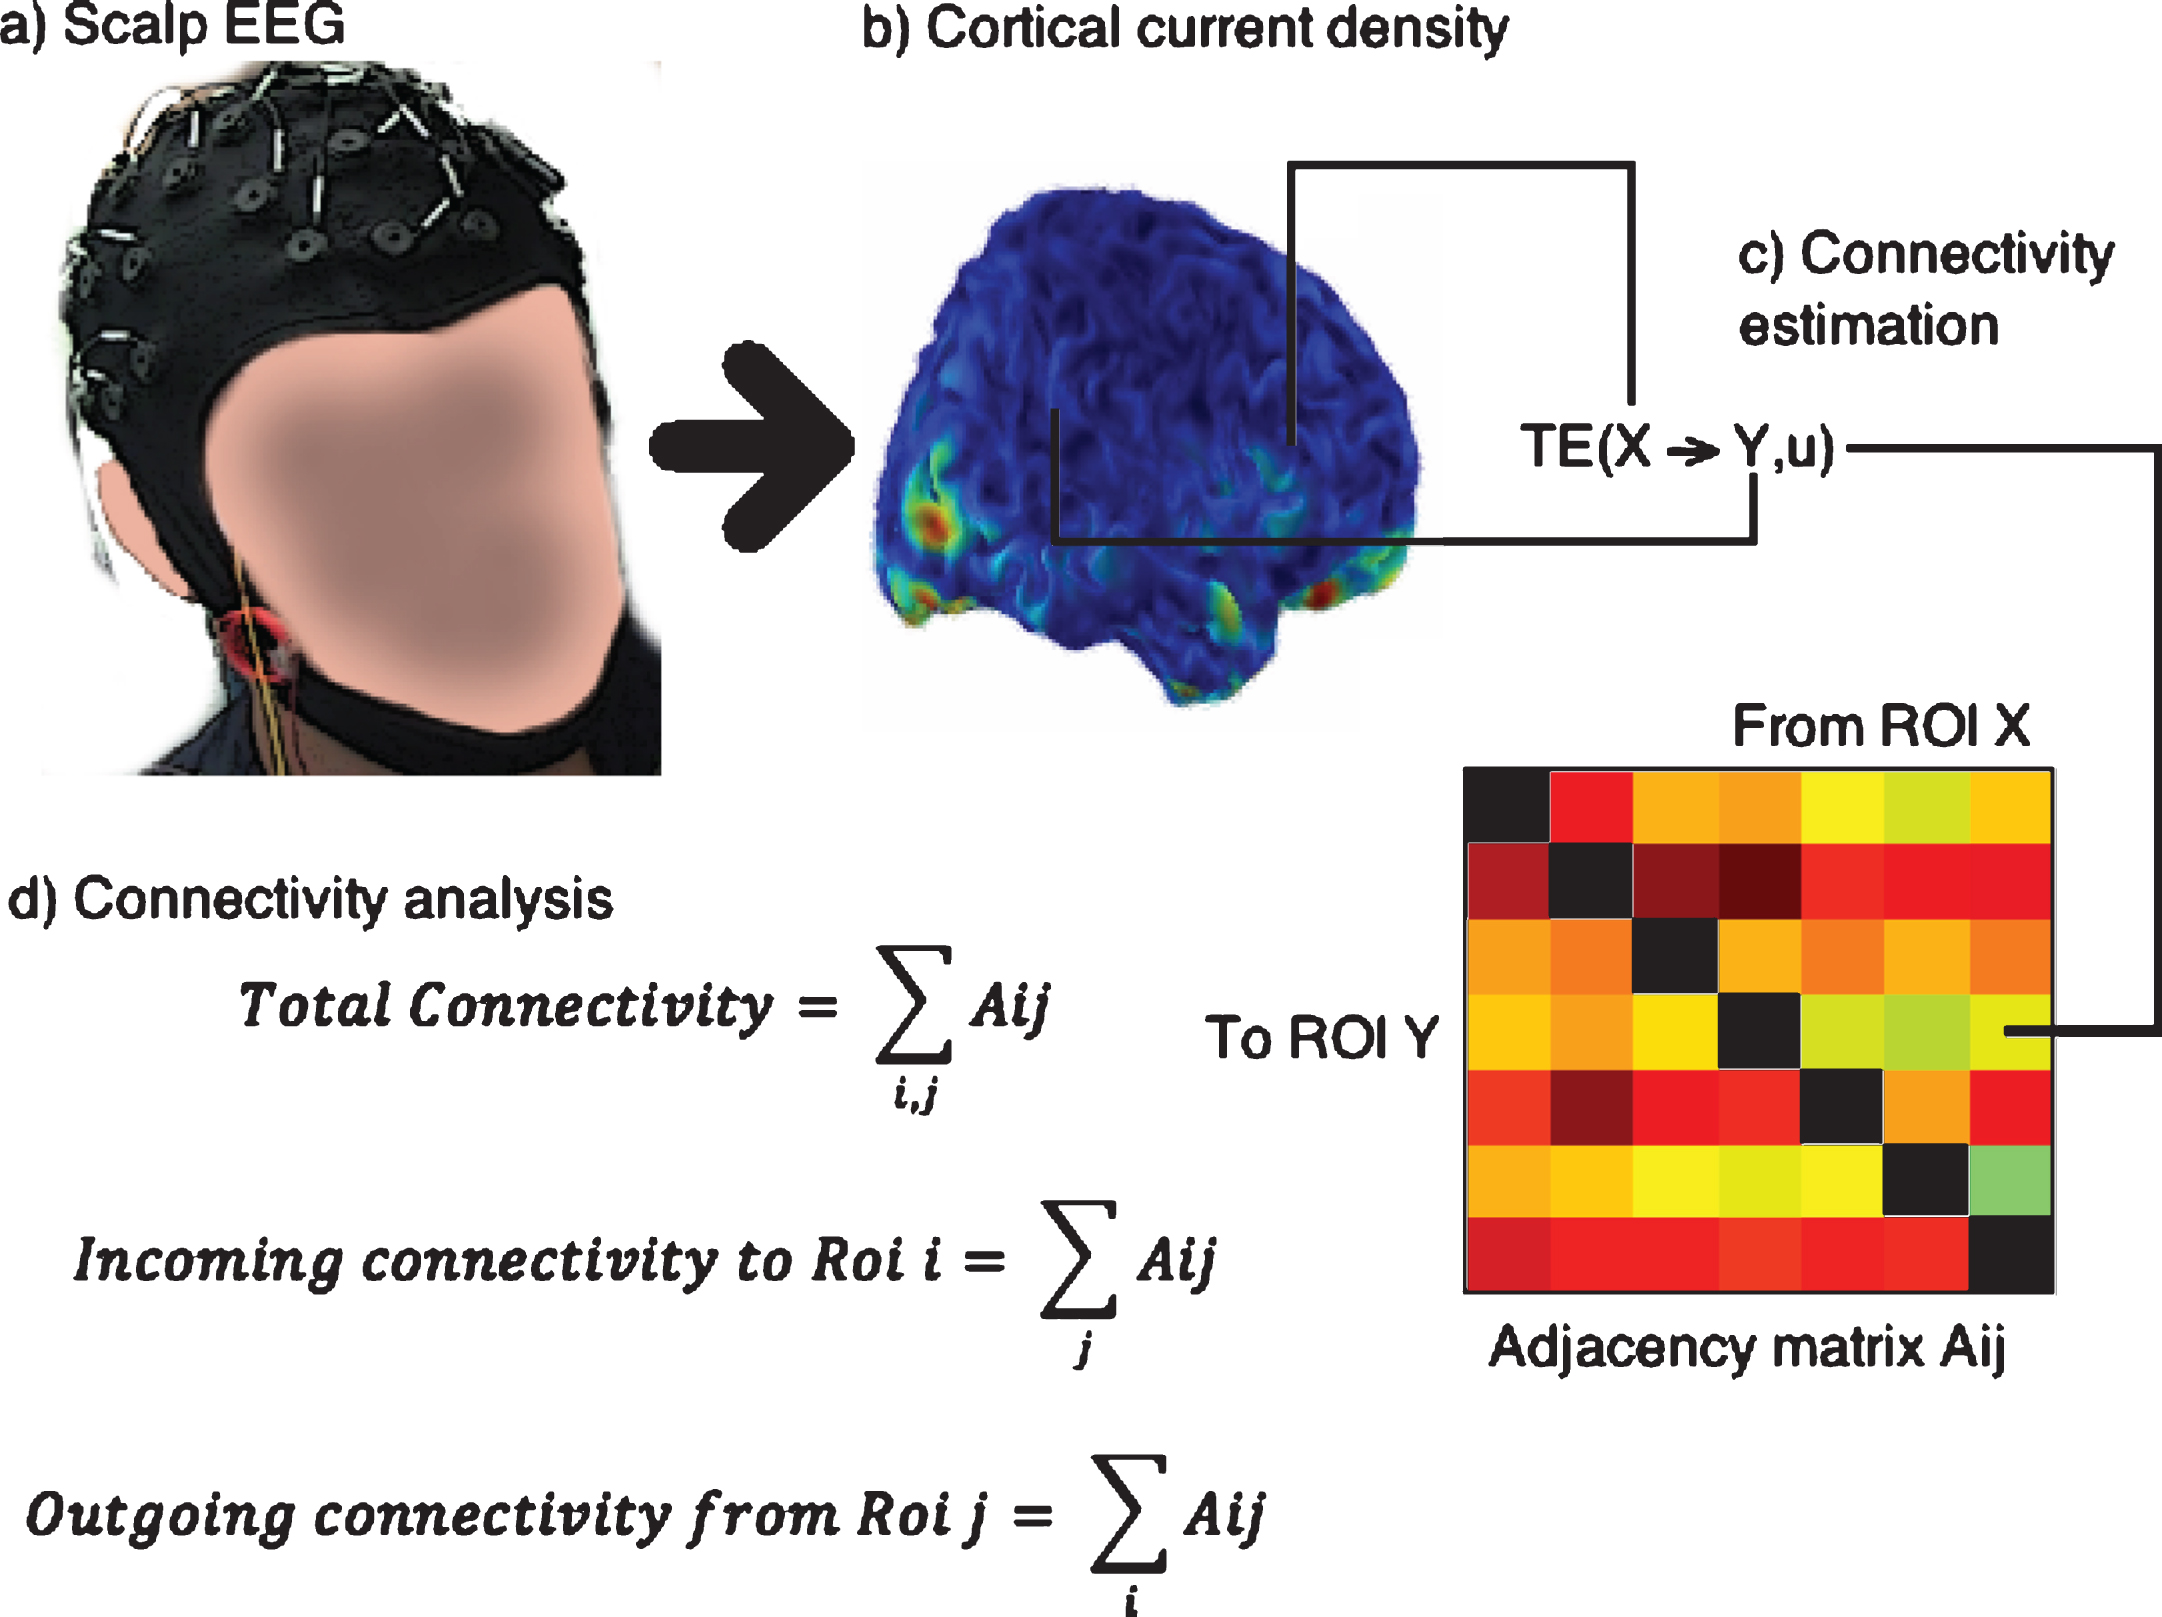 Steps followed for connectivity analysis: The scalp EEG (a) is converted to cortical current density (b). The signal for transfer entropy (TE) analysis is obtained as the average of the voxels contained in each ROI (c) and an Adjacency matrix is built, shown in colors where a warmer color indicates higher TE, and contains all the relevant connections. From the adjacency matrix the connectivity indices are obtained as sums over the rows or columns or both.